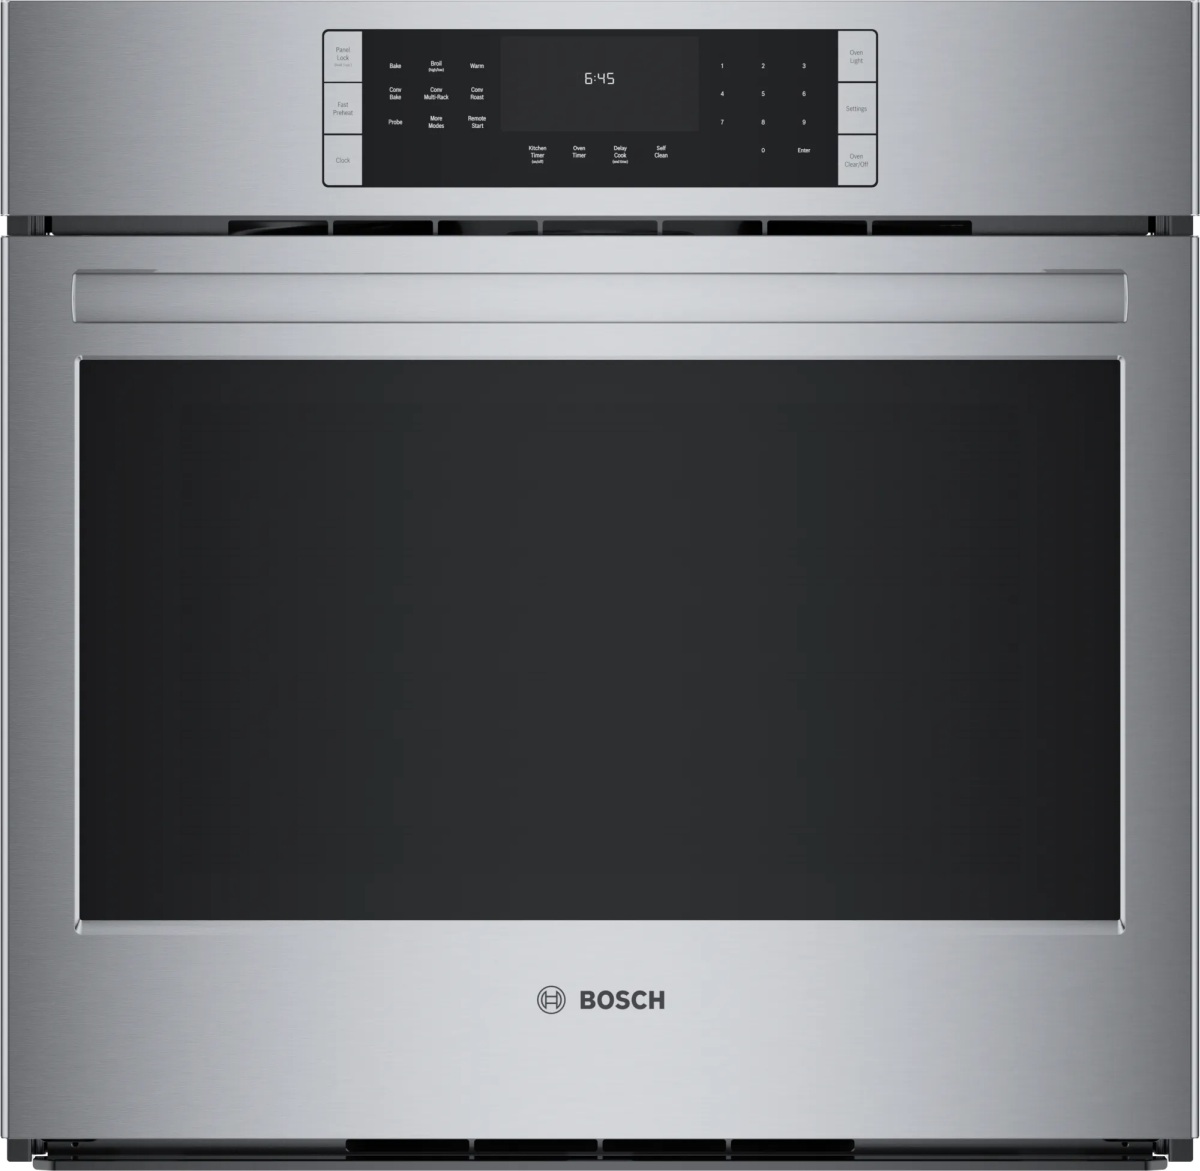 Bosch 800 Series 30" Stainless Steel Single Electric Wall Oven